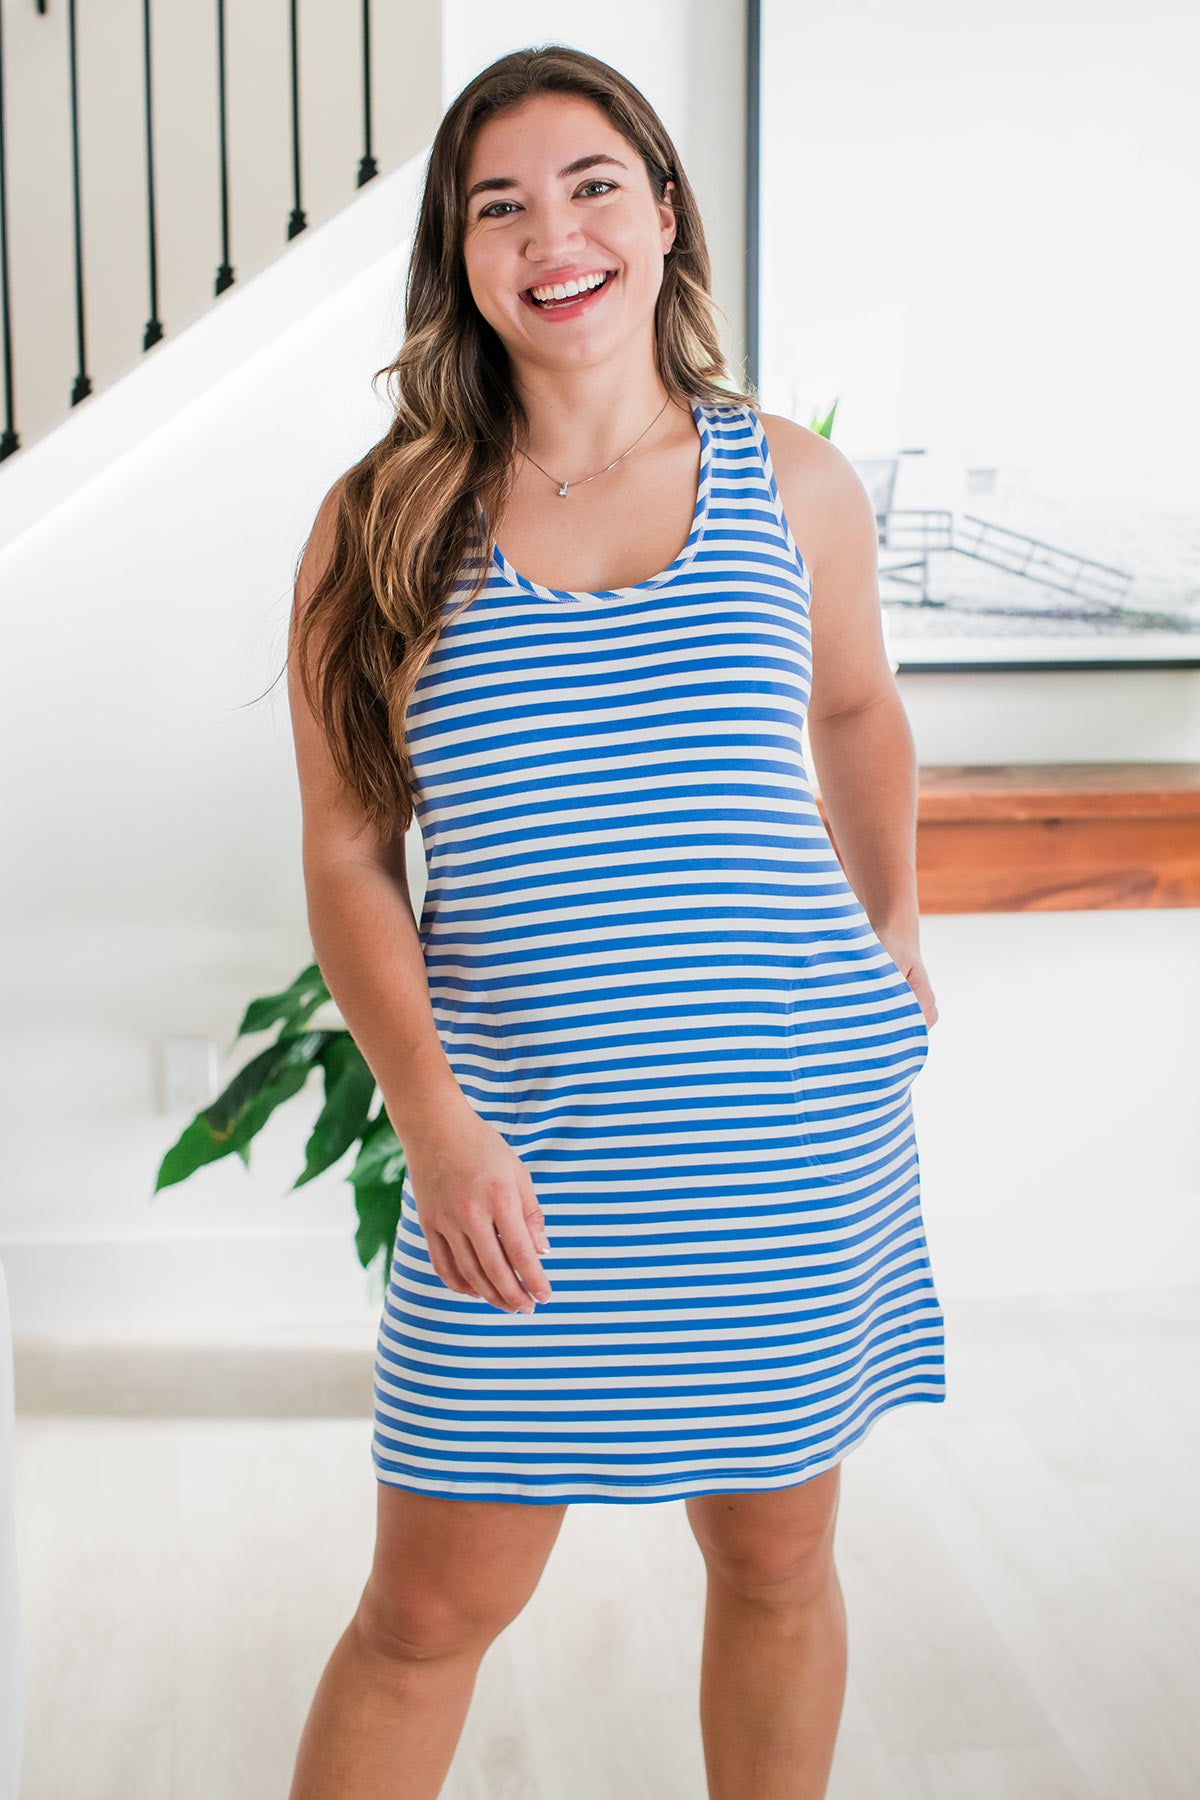 A woman standing with a smile on her face and one hand in her pocket, wearing Yala Riley Racerback Two Pocket Bamboo Shift Dress in French Blue Natural Stripe